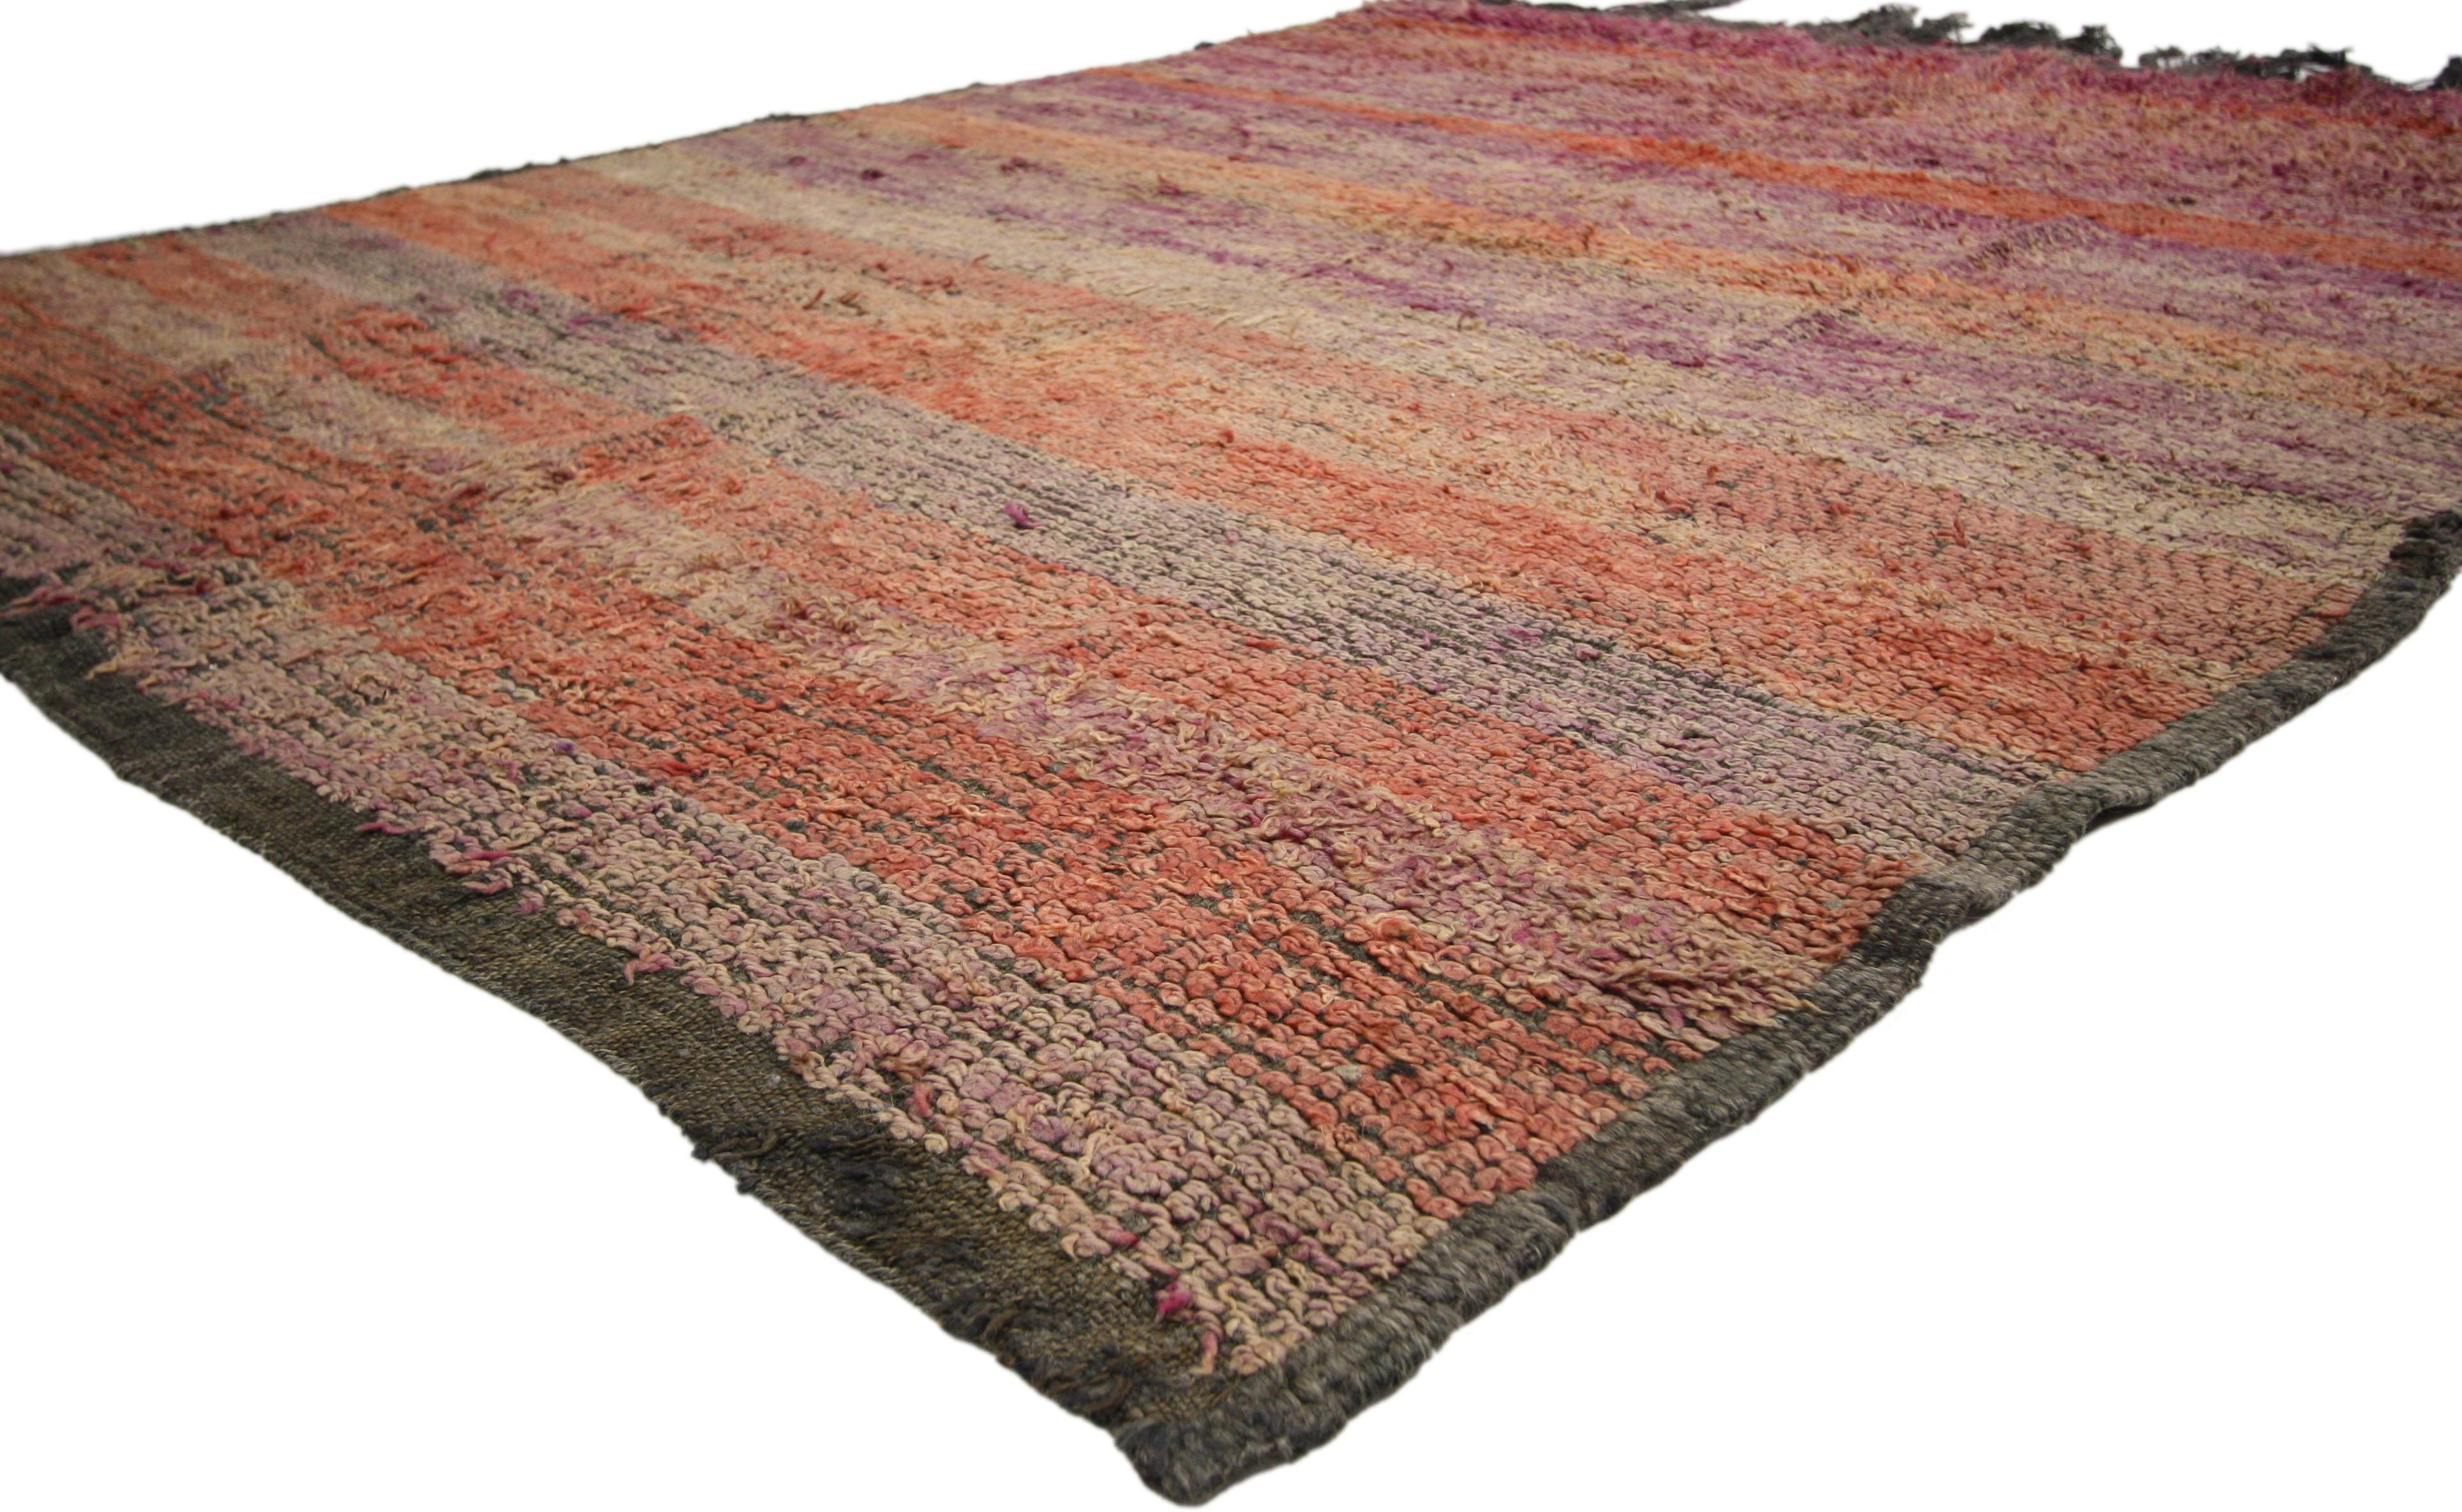 20735, vintage Berber Moroccan rug with Postmodern Memphis style, Moroccan Berber rug. Featuring rich waves of abrash, luxury underfoot and a pop of color, this hand knotted wool vintage Moroccan rug represents Postmodern Memphis style while staying